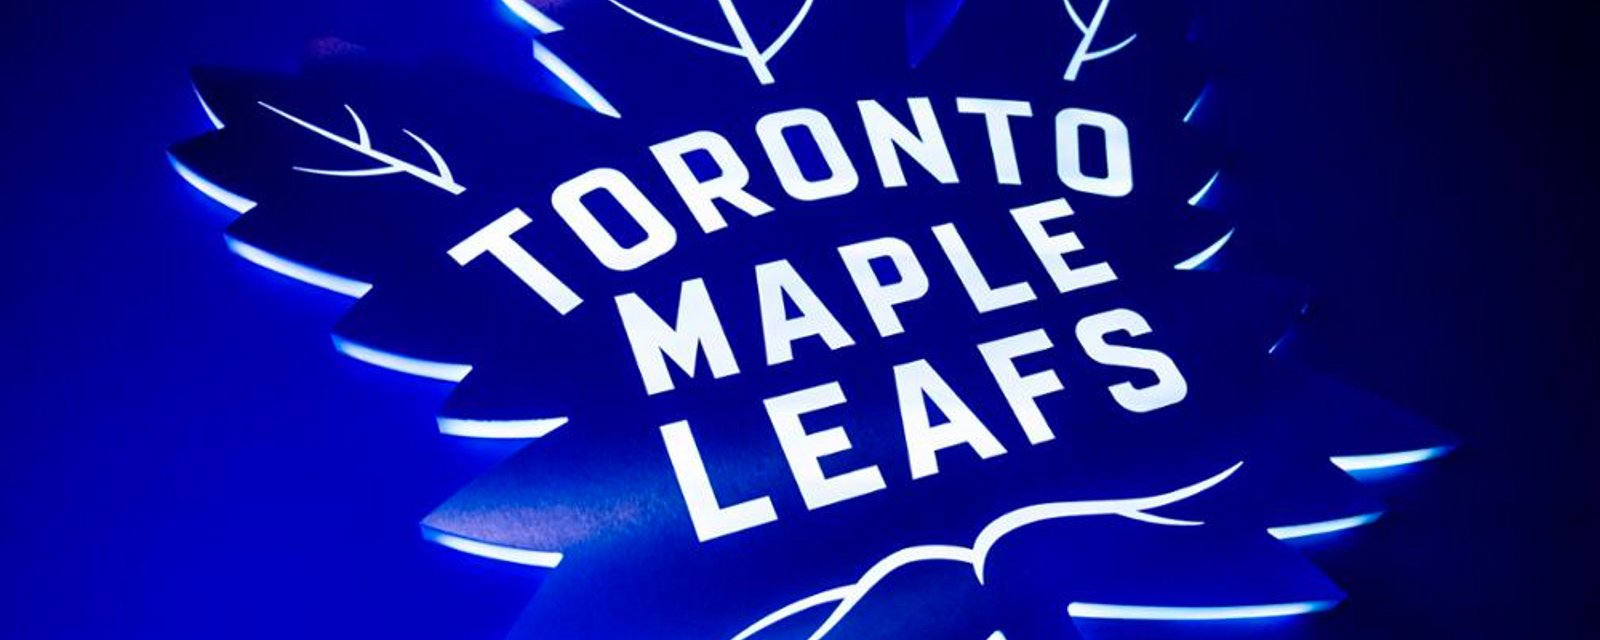 Leafs make some front office changes